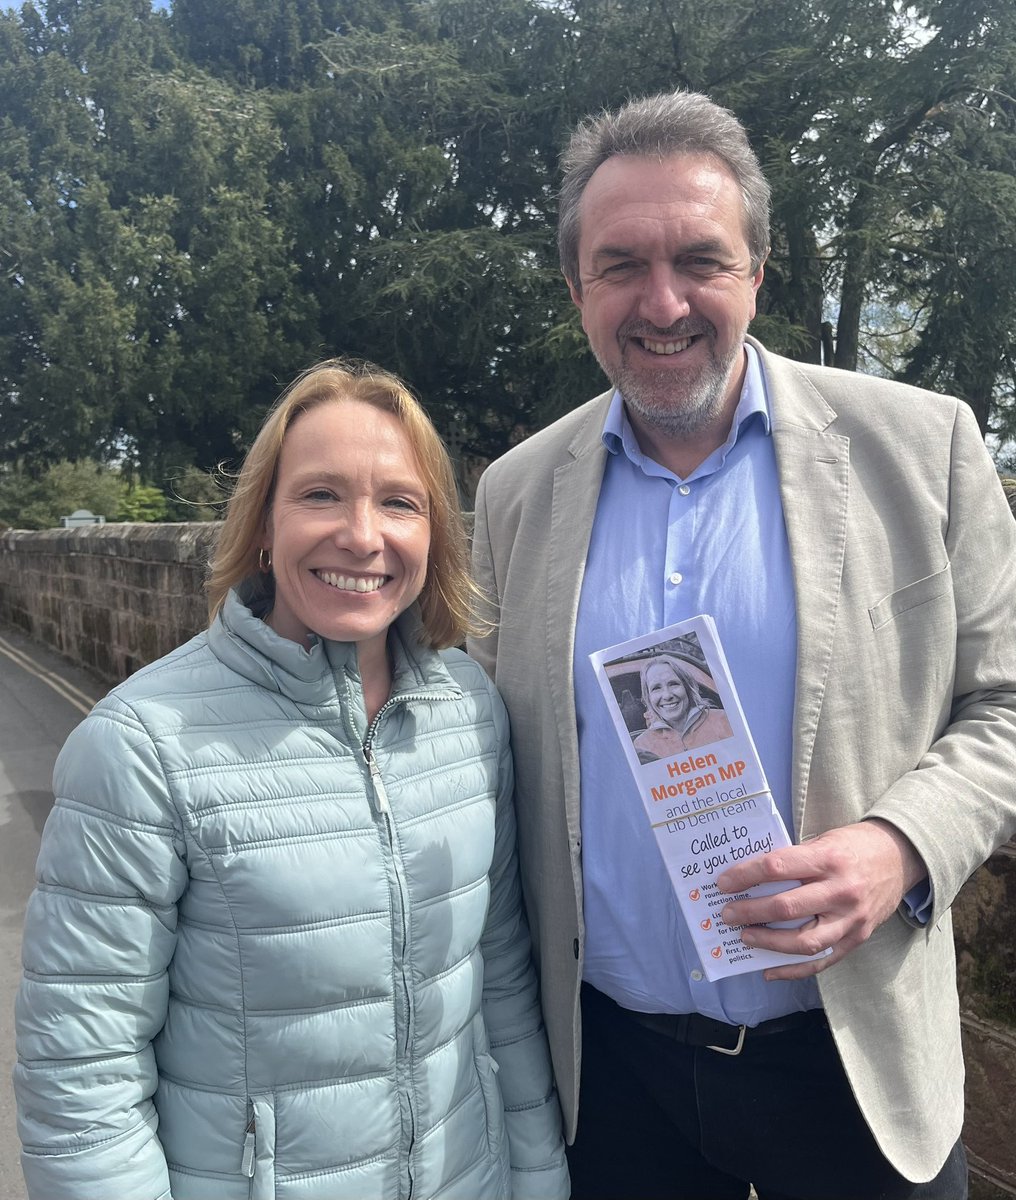 Delighted to join @HelenMorganMP in Market Drayton this morning. Wherever you go in North Shropshire, residents are full of praise for Helen’s impressive work as a local MP. They also know that in #NorthShropshire, (as in #SouthShropshire) only @LibDems can beat the Tories.